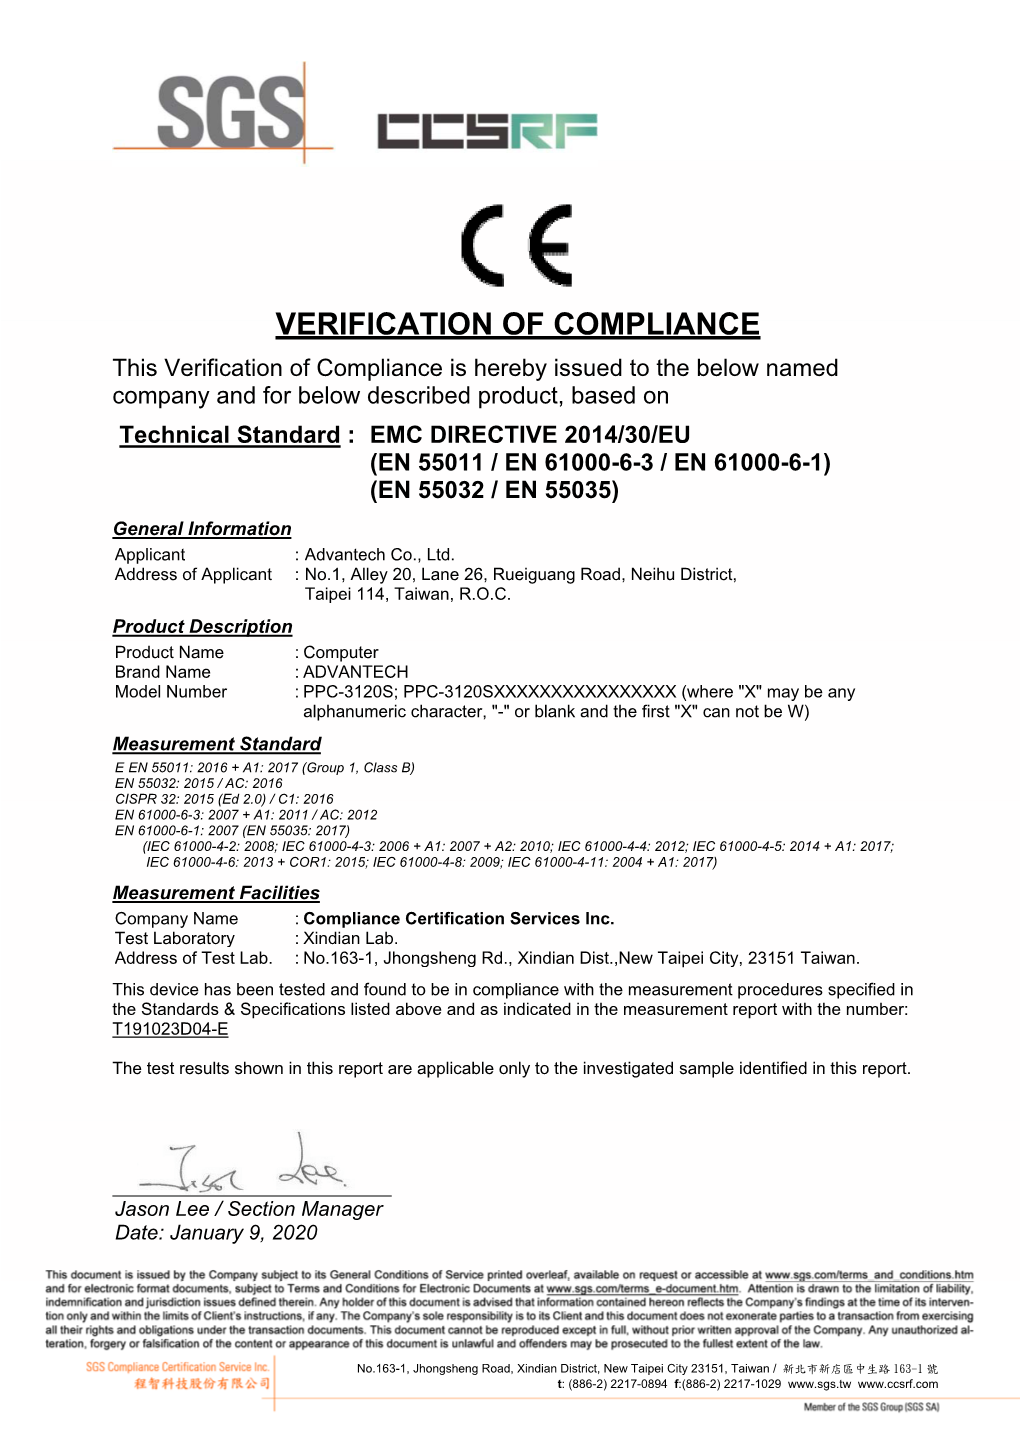 VERIFICATION of COMPLIANCE This Verification of Compliance Is Hereby Issued to the Below Named Company and for Below Described Product, Based On